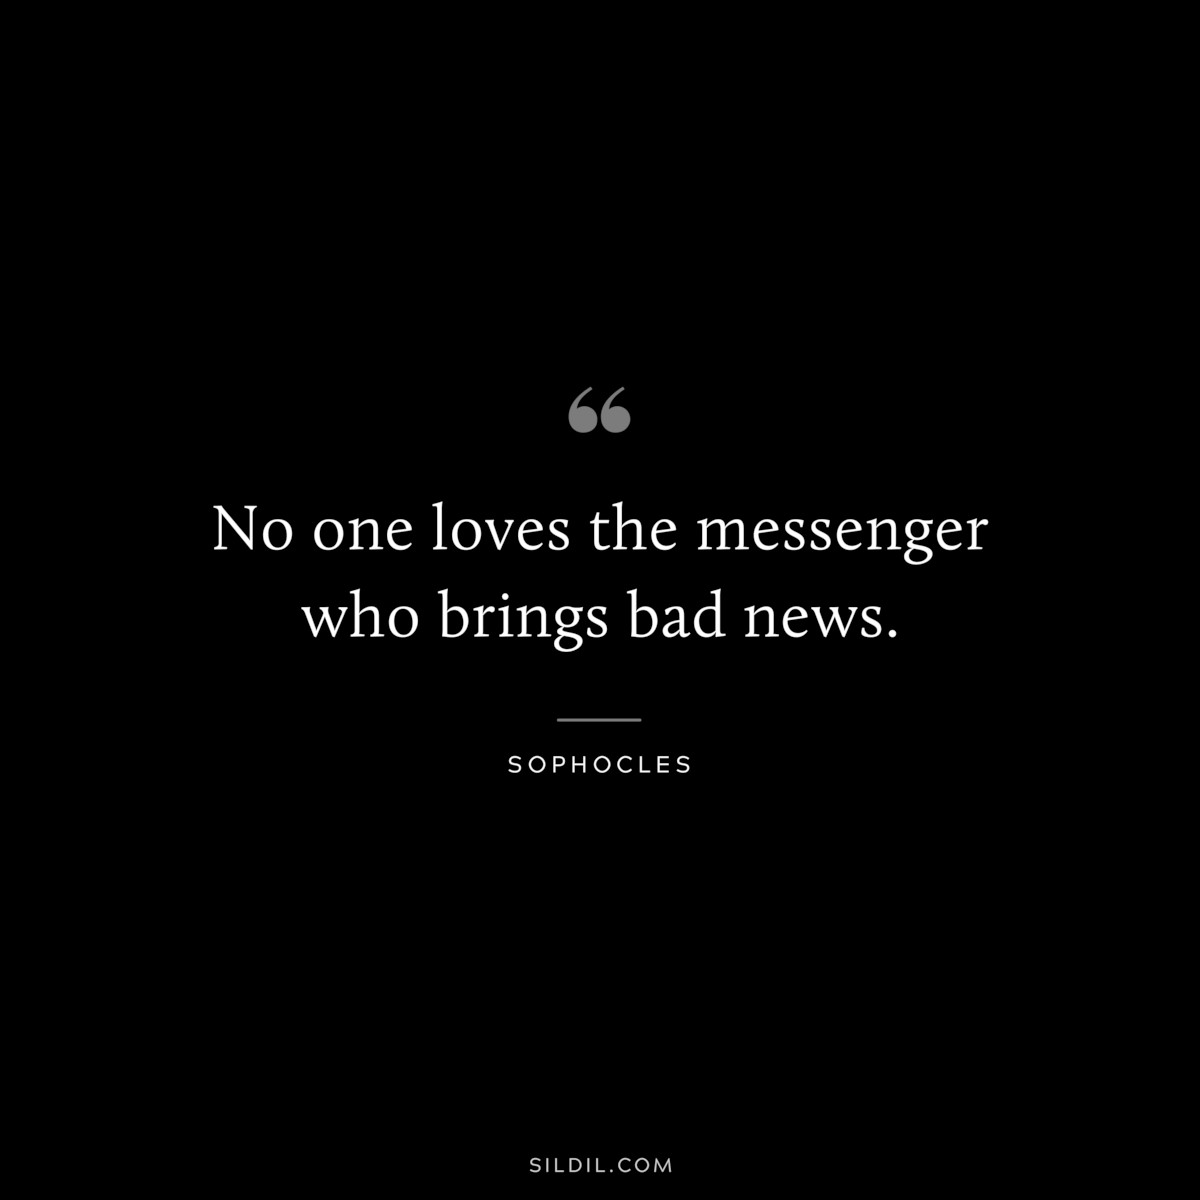 No one loves the messenger who brings bad news. ― Sophocles